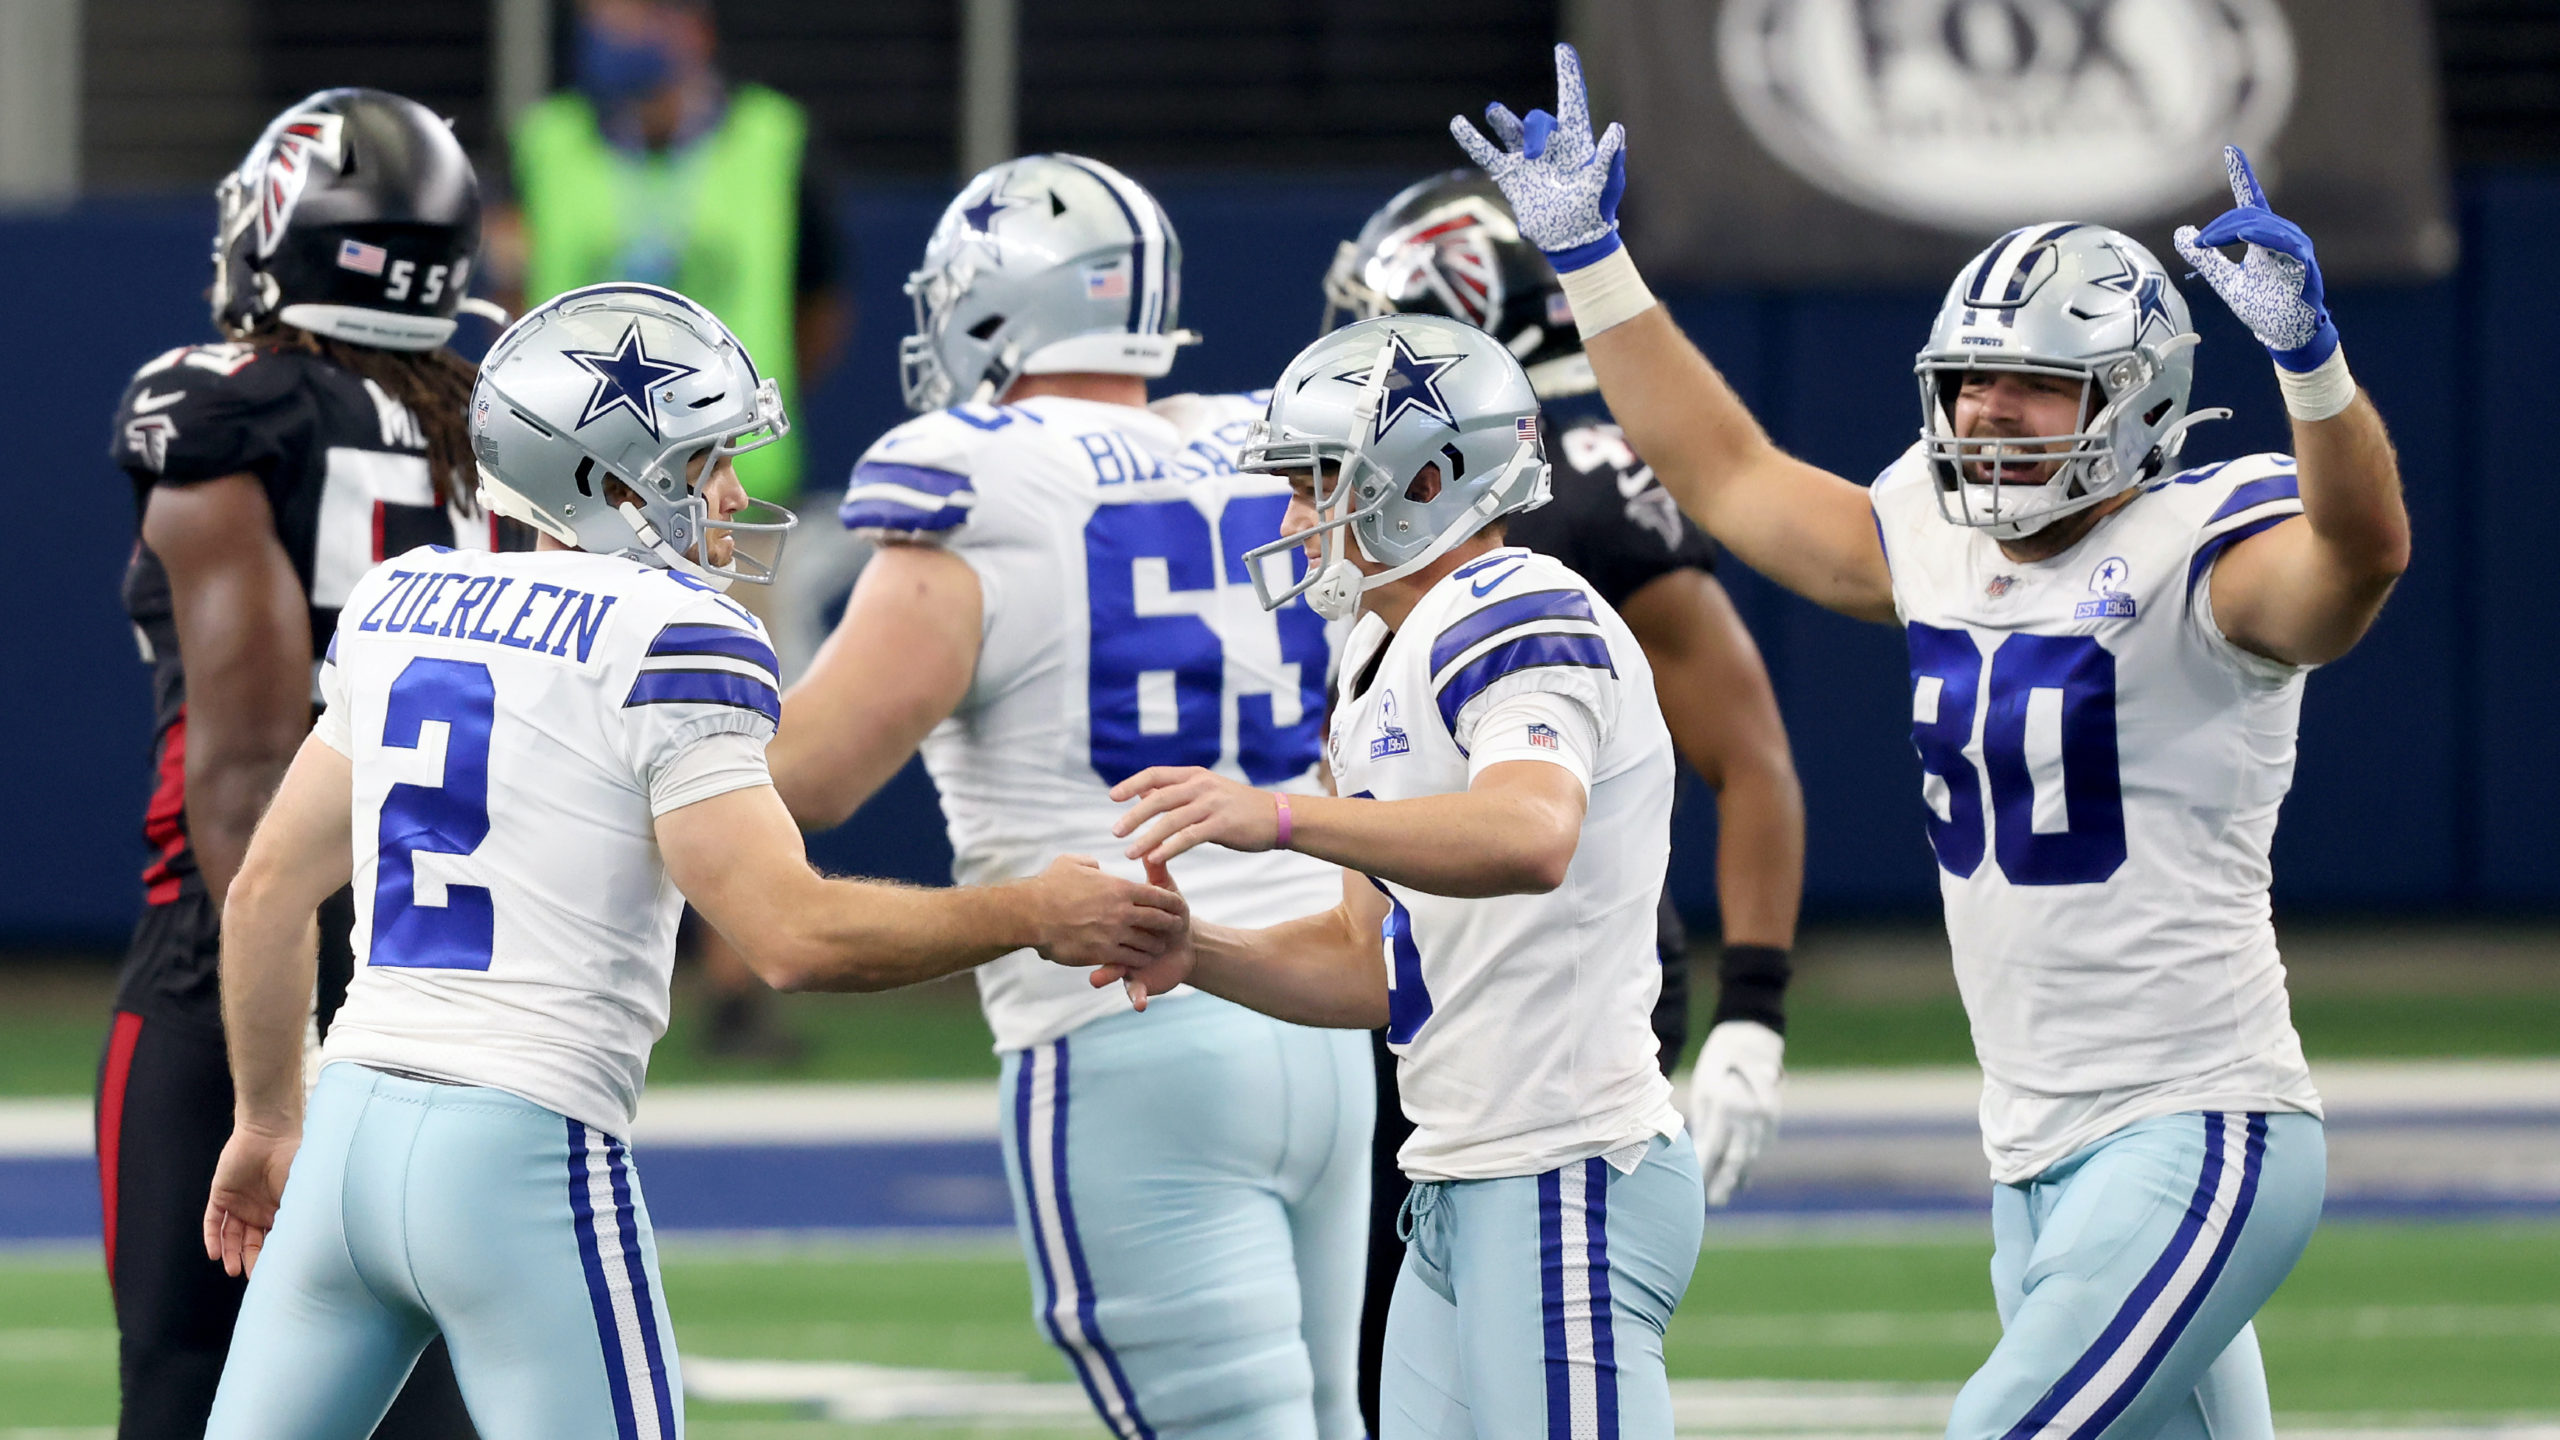 Dallas Cowboys at New York Giants: Dallas Cowboys get huge win within NFC  East - Blogging The Boys